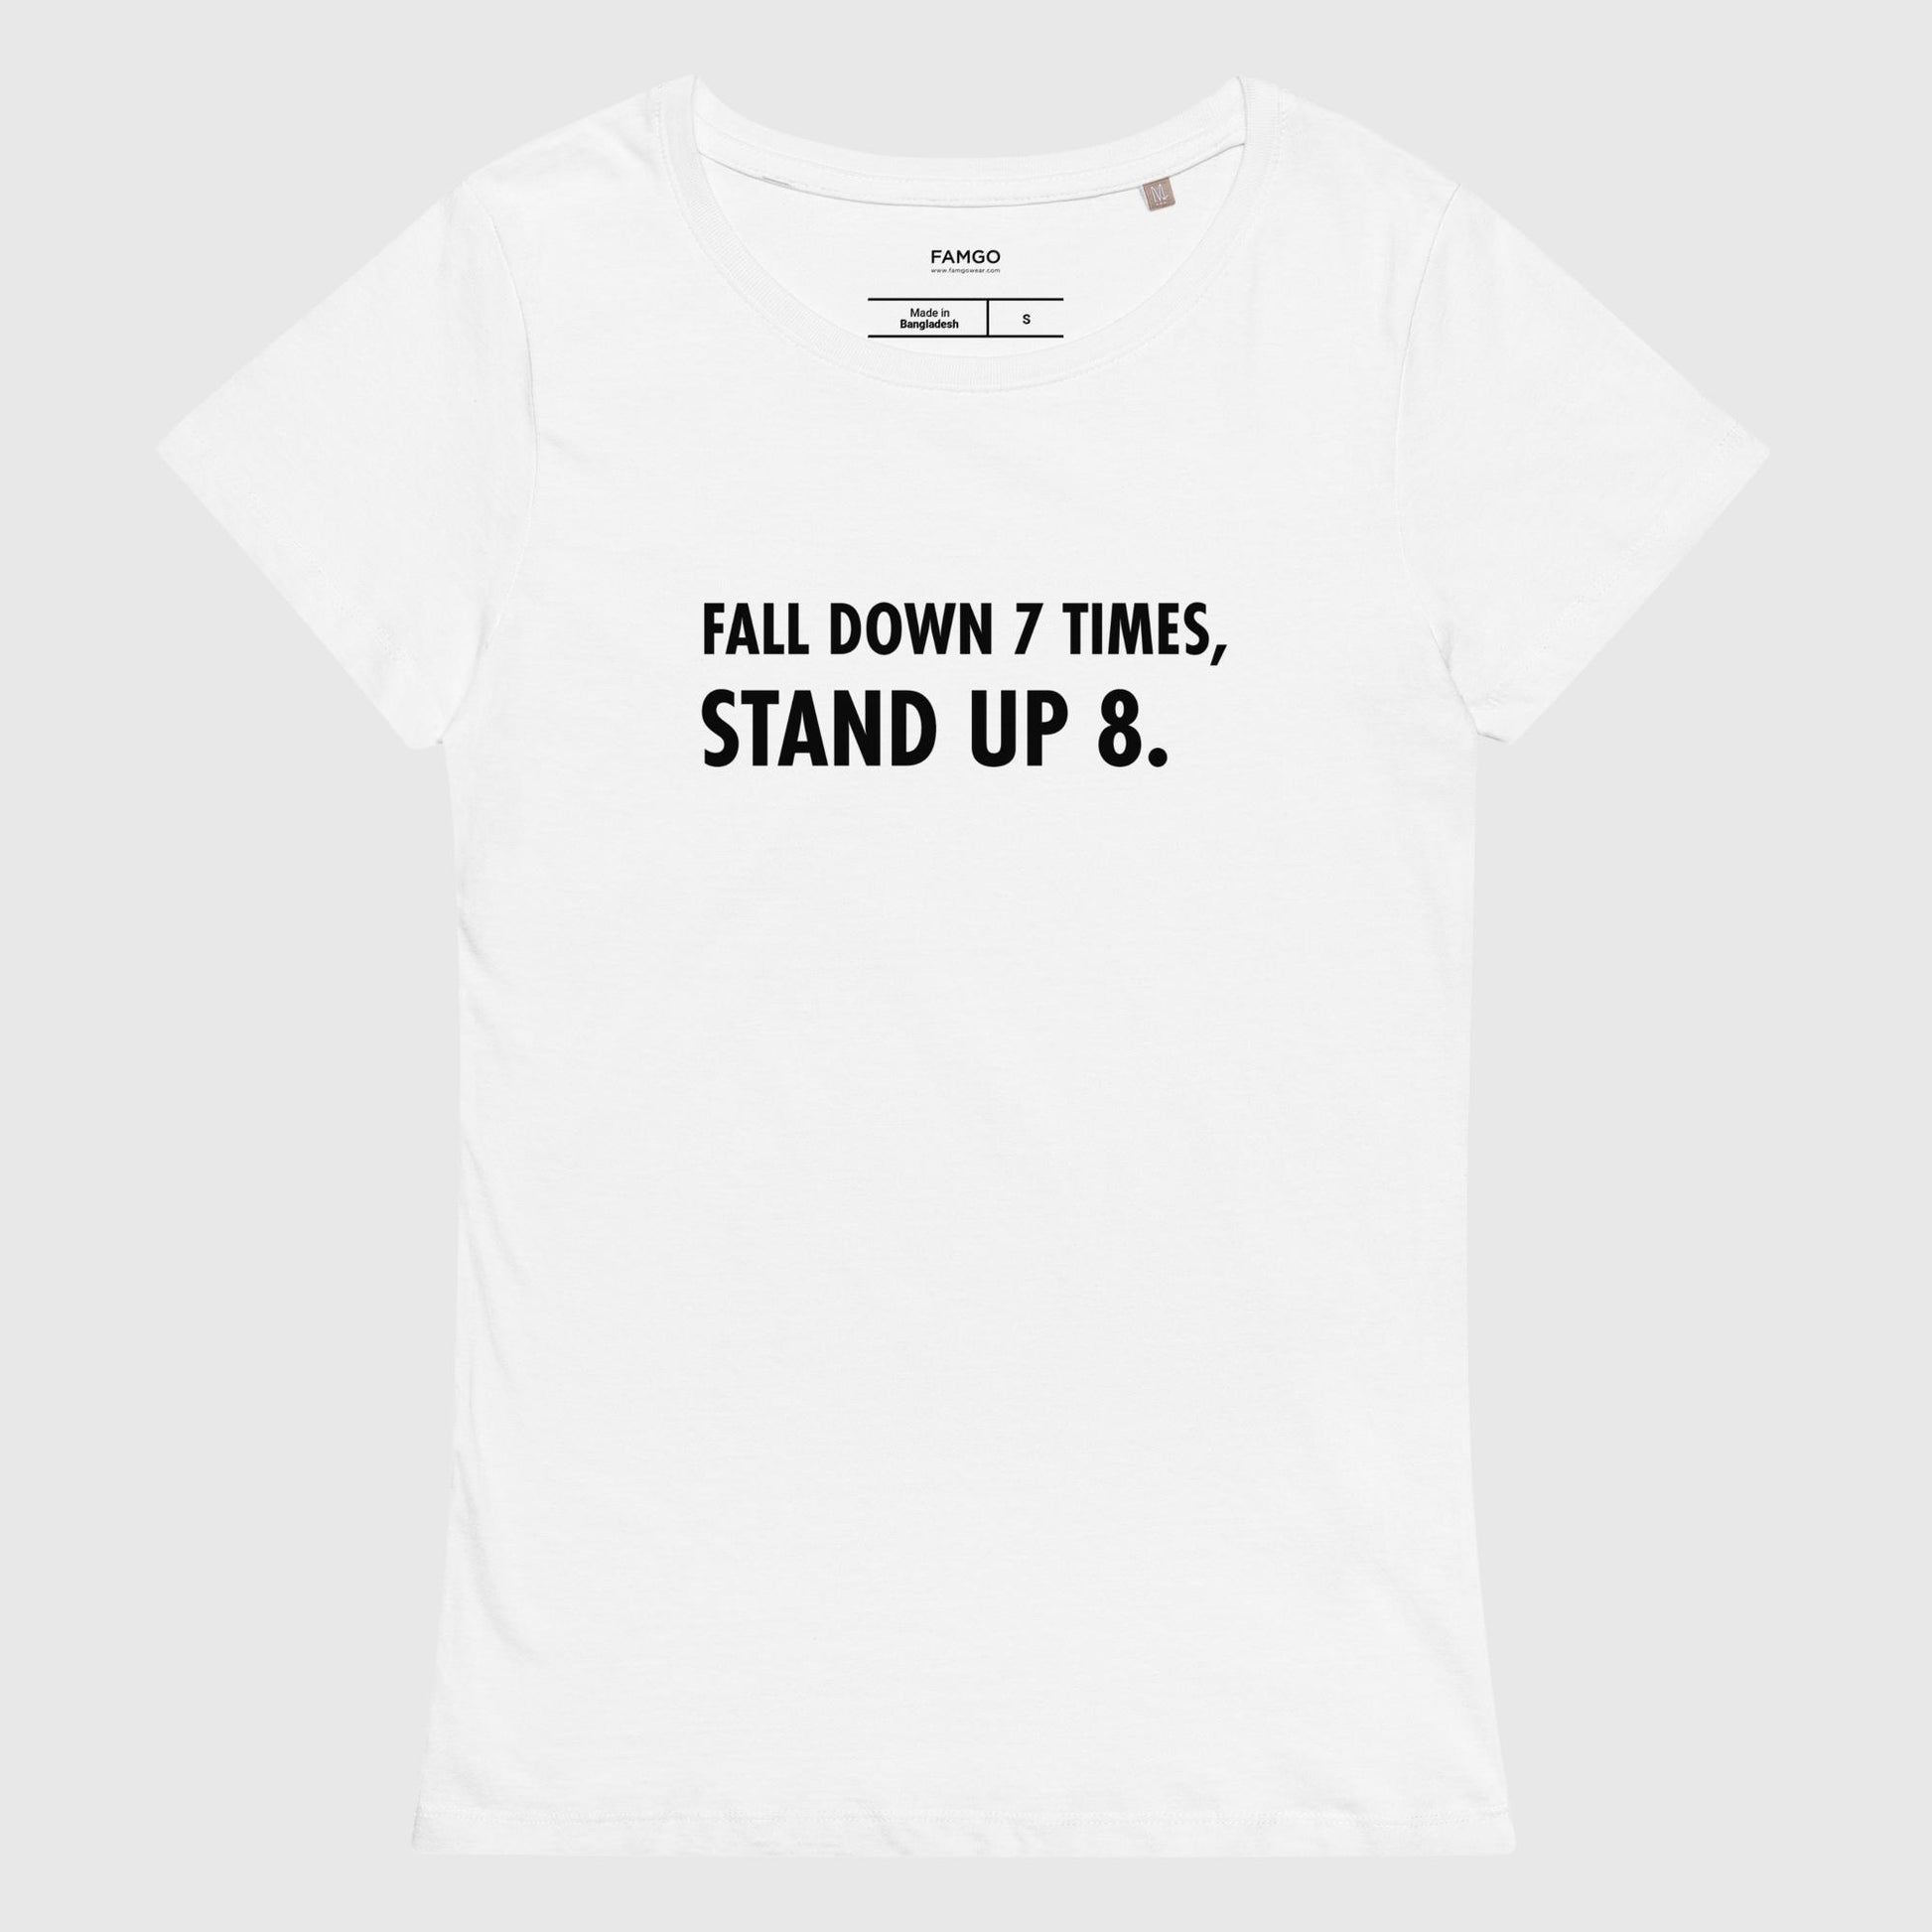 Women's white organic cotton t-shirt that features the Japanese proverb, "Fall Down 7 Times, Stand Up 8."